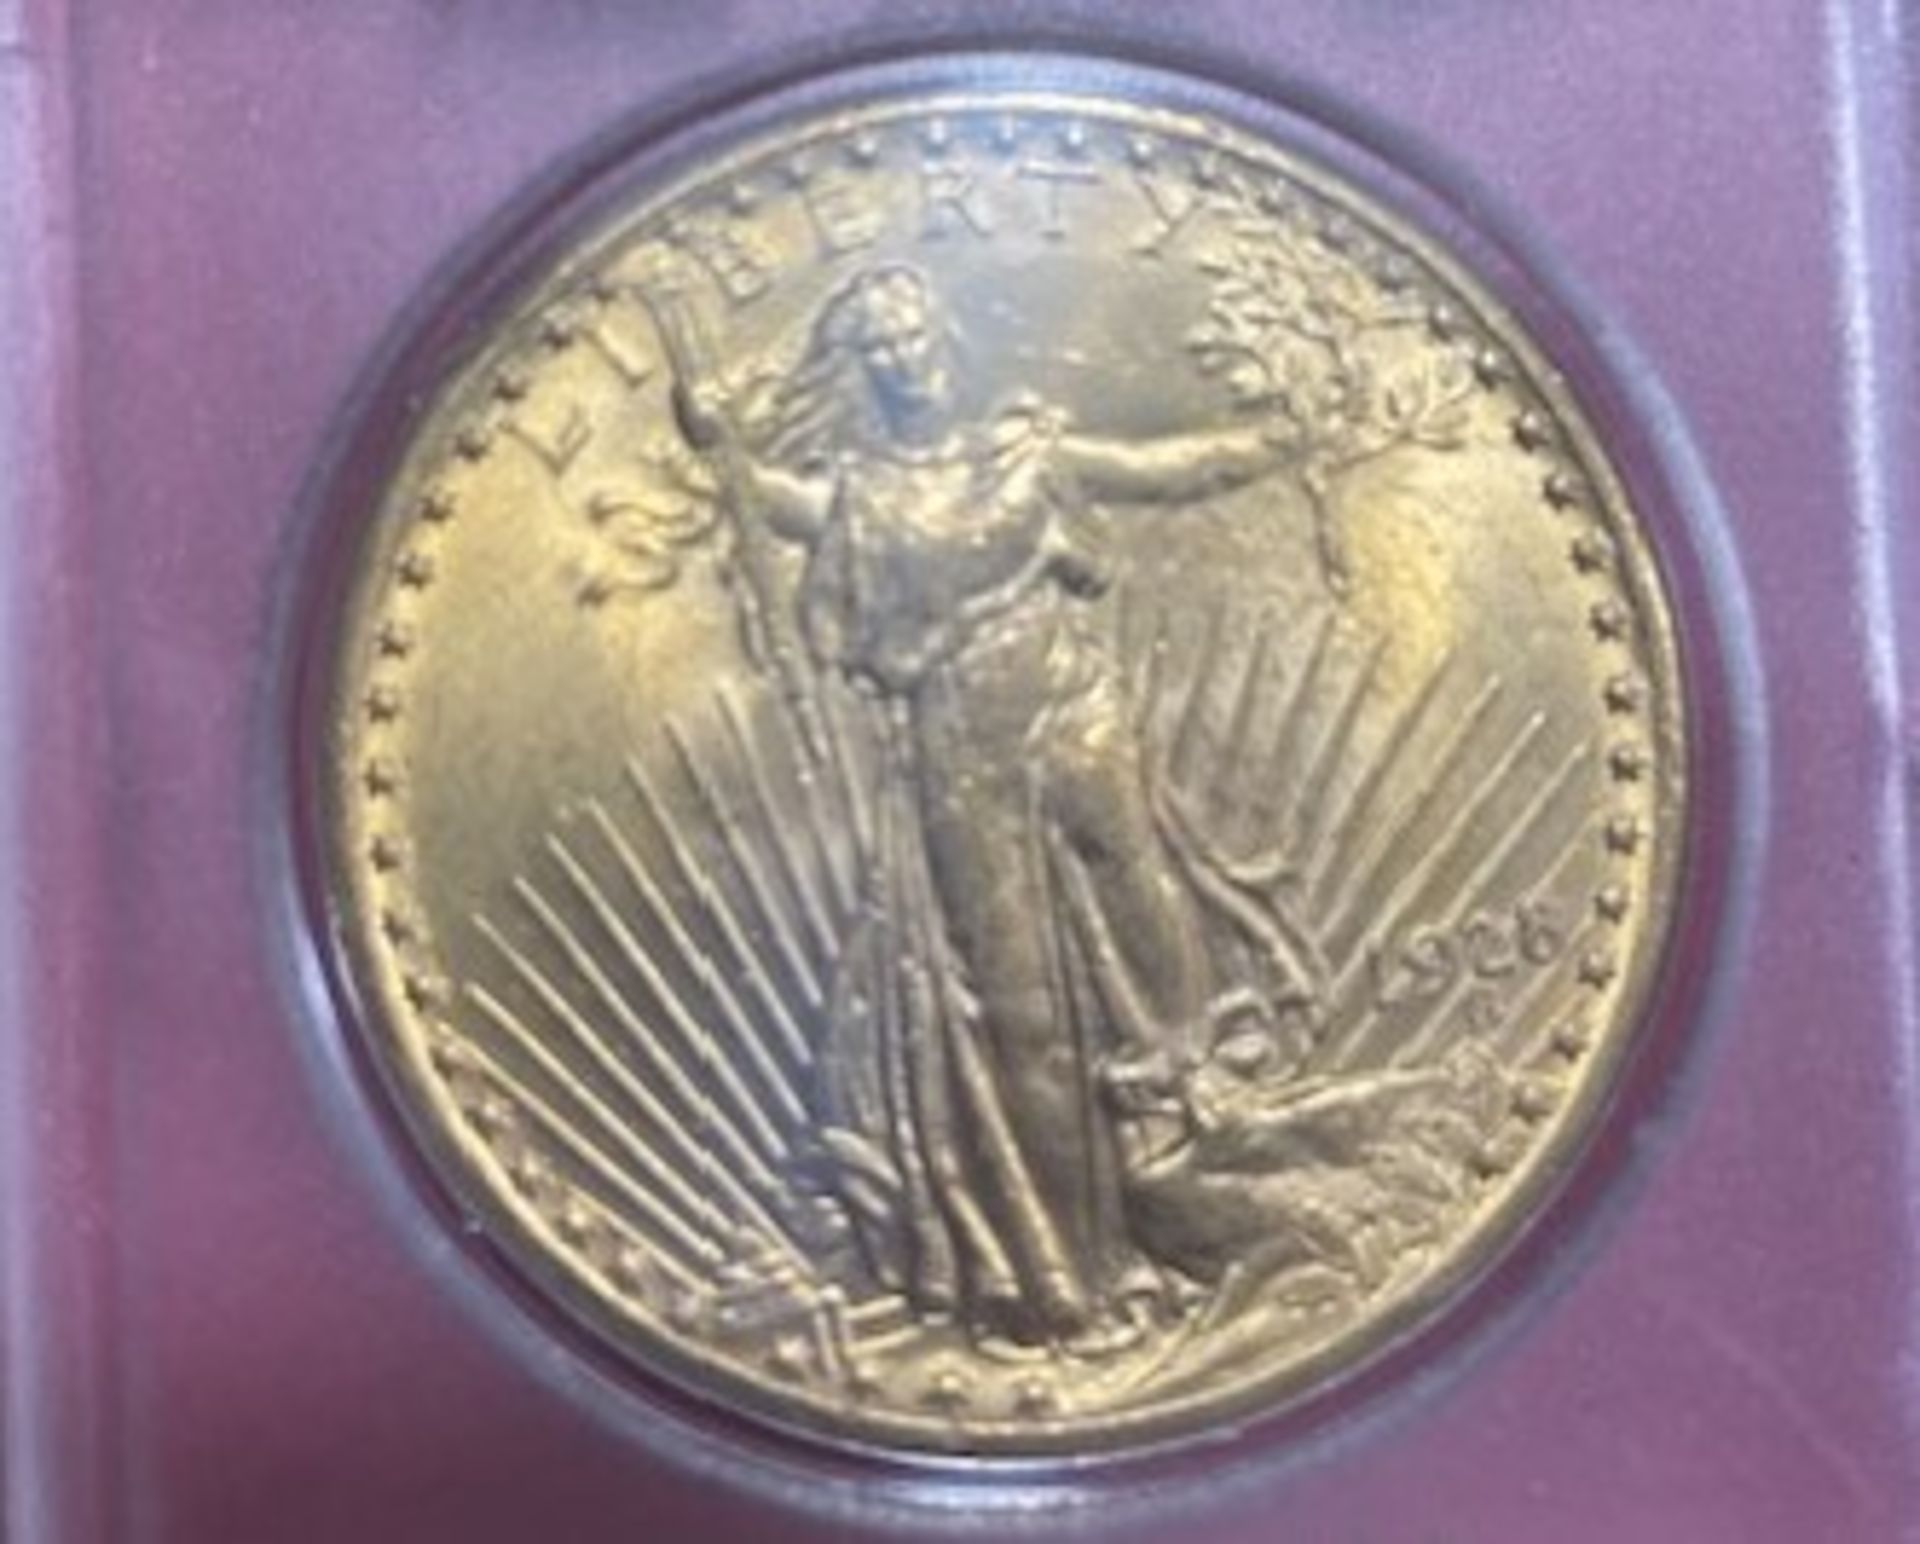 1928 St. Gaudens Double Eagle $20 Gold Coin - Image 2 of 12